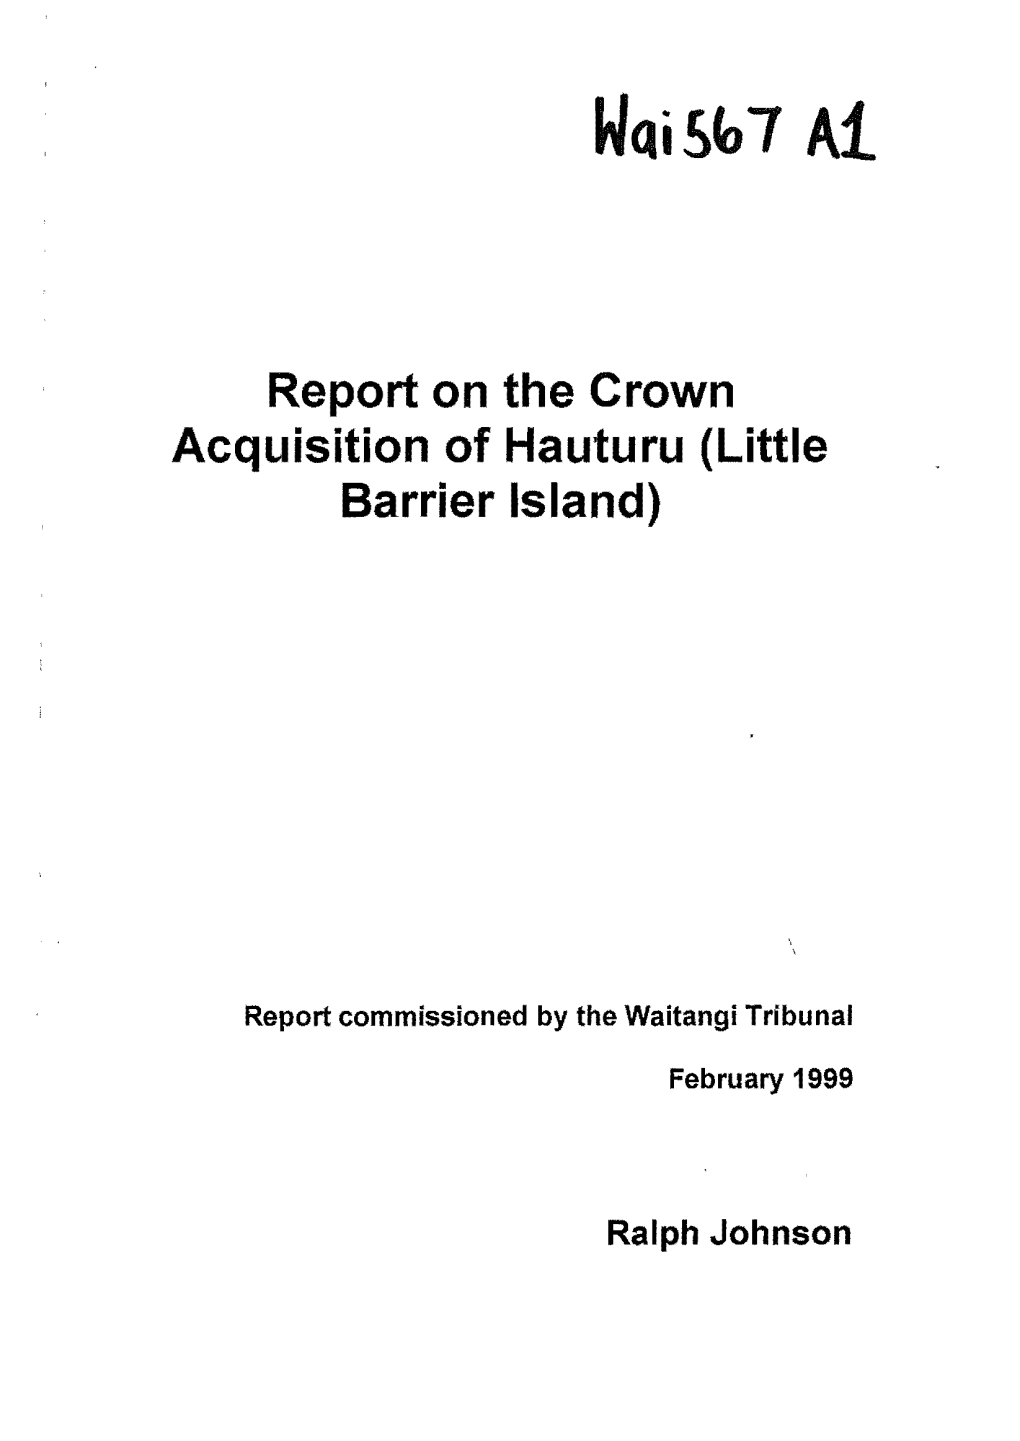 Report on the Crown Acquisition of Hauturu (Little Barrier Island)